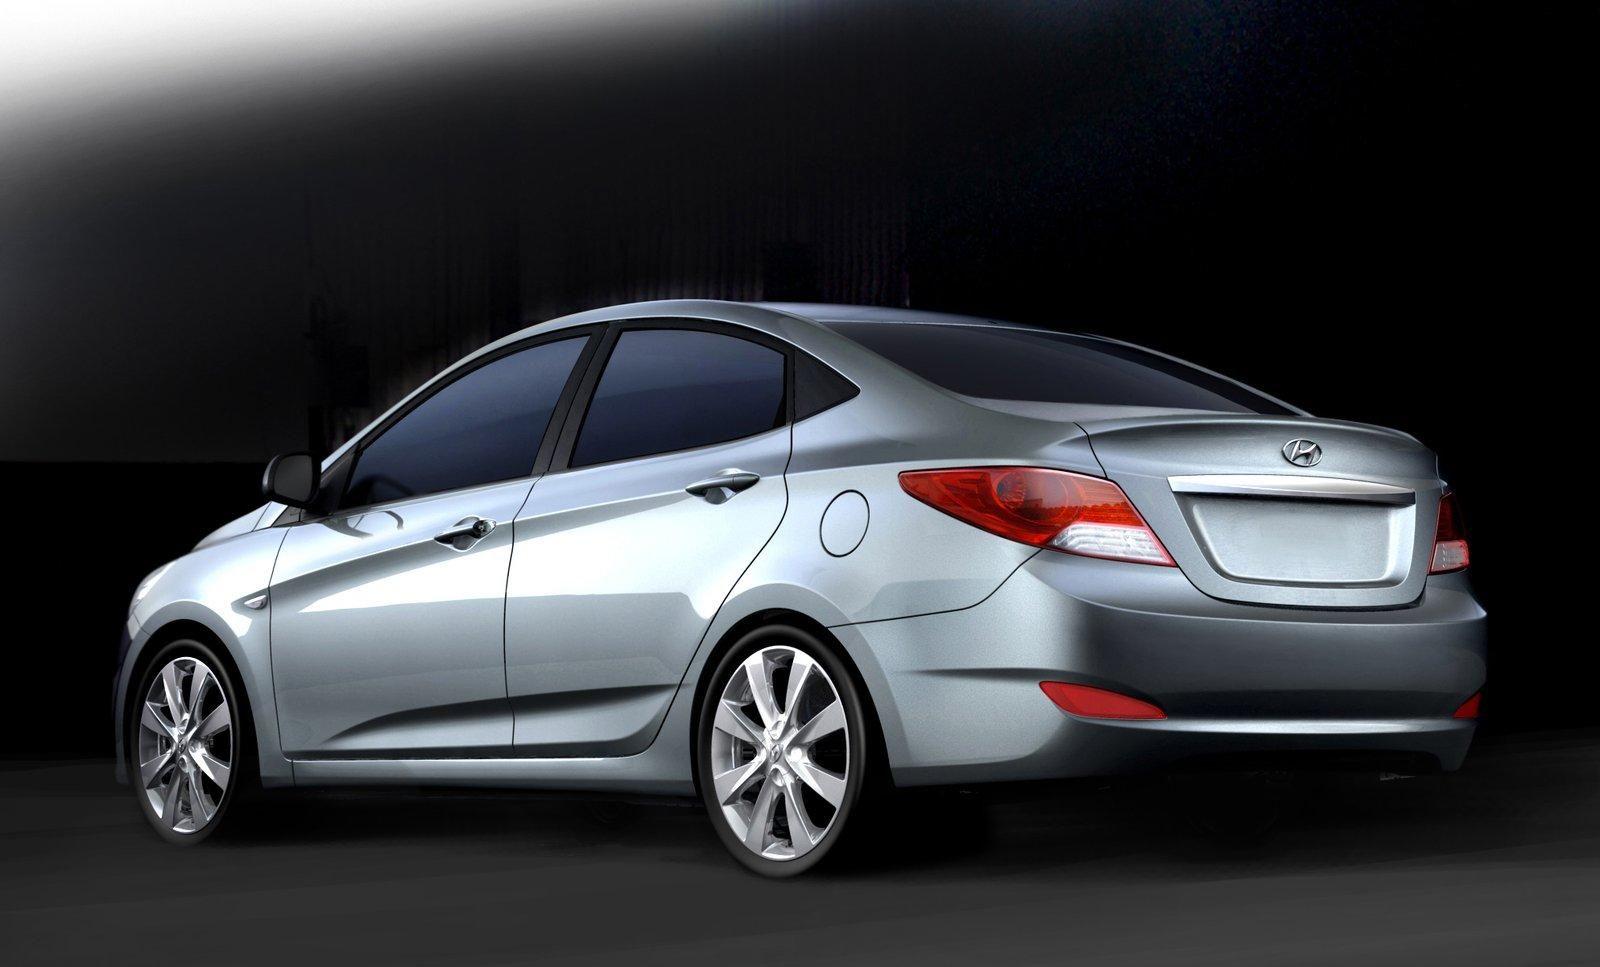 Hyundai Verna / Accent 2010 photo 58906 picture at high resolution